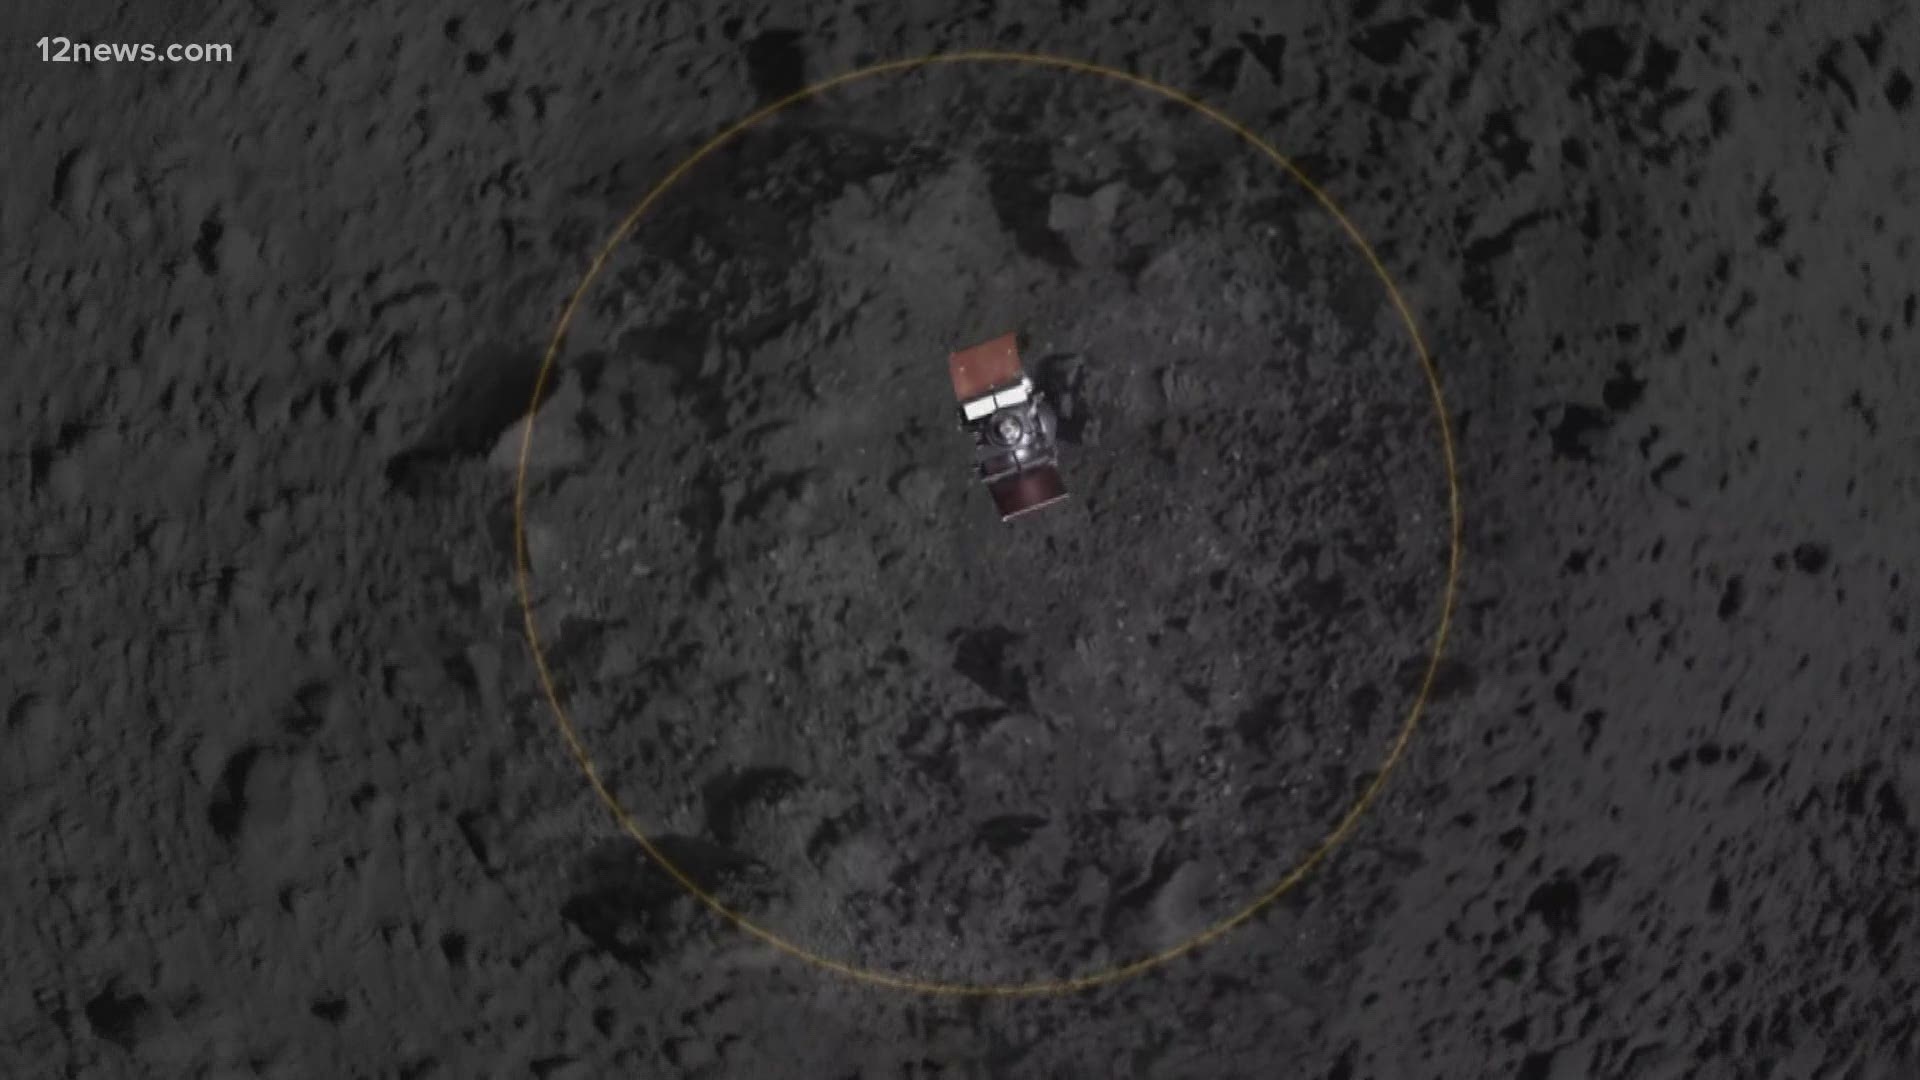 NASA is looking to make history next month. It is scheduled to land a probe with Arizona connections on an asteroid. Team 12's Matt Yurus has the latest.